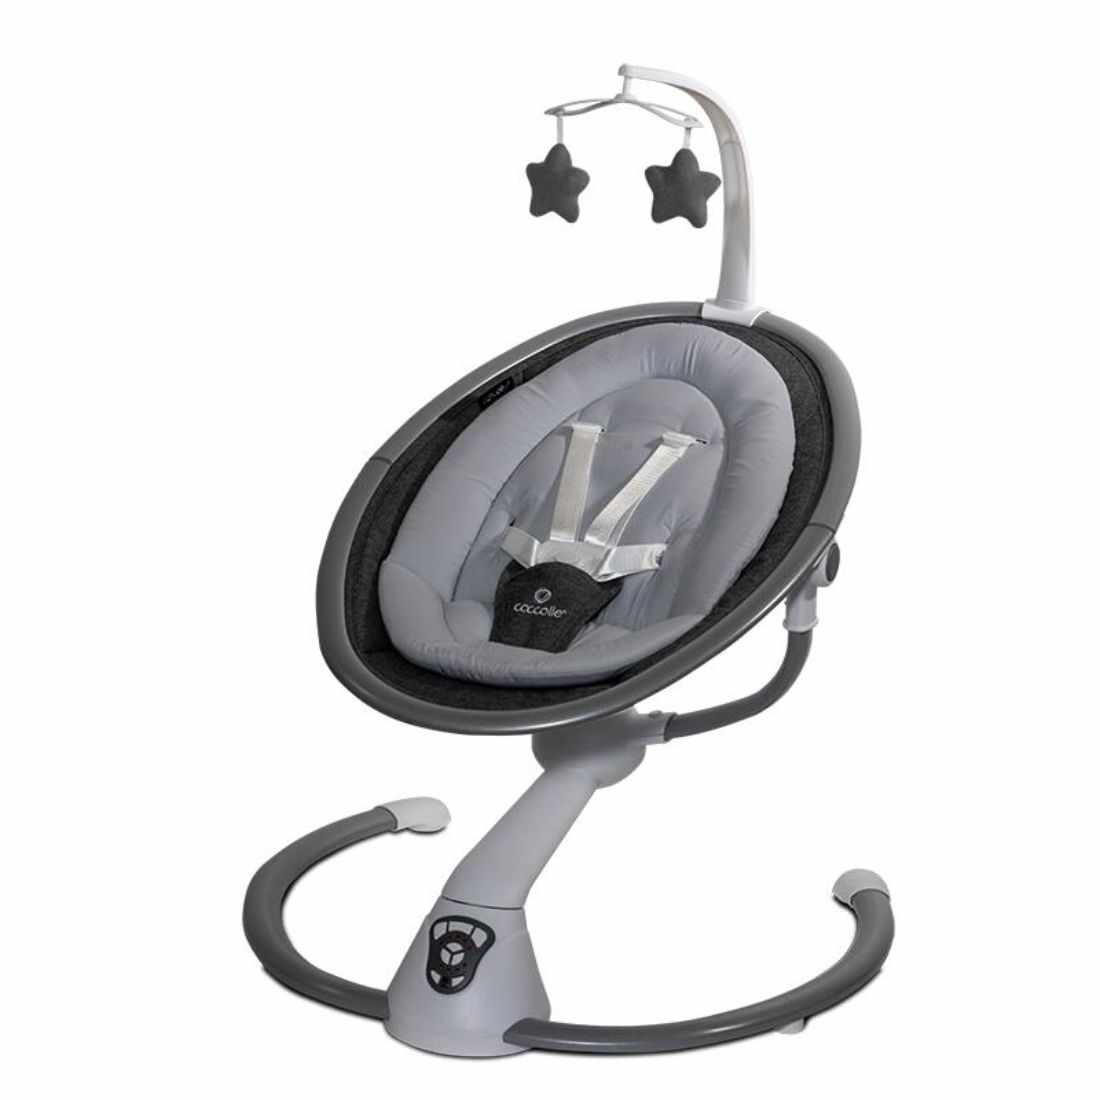 Balansoar multifunctional DHS Baby, Coccolle Freya, Anthracite 